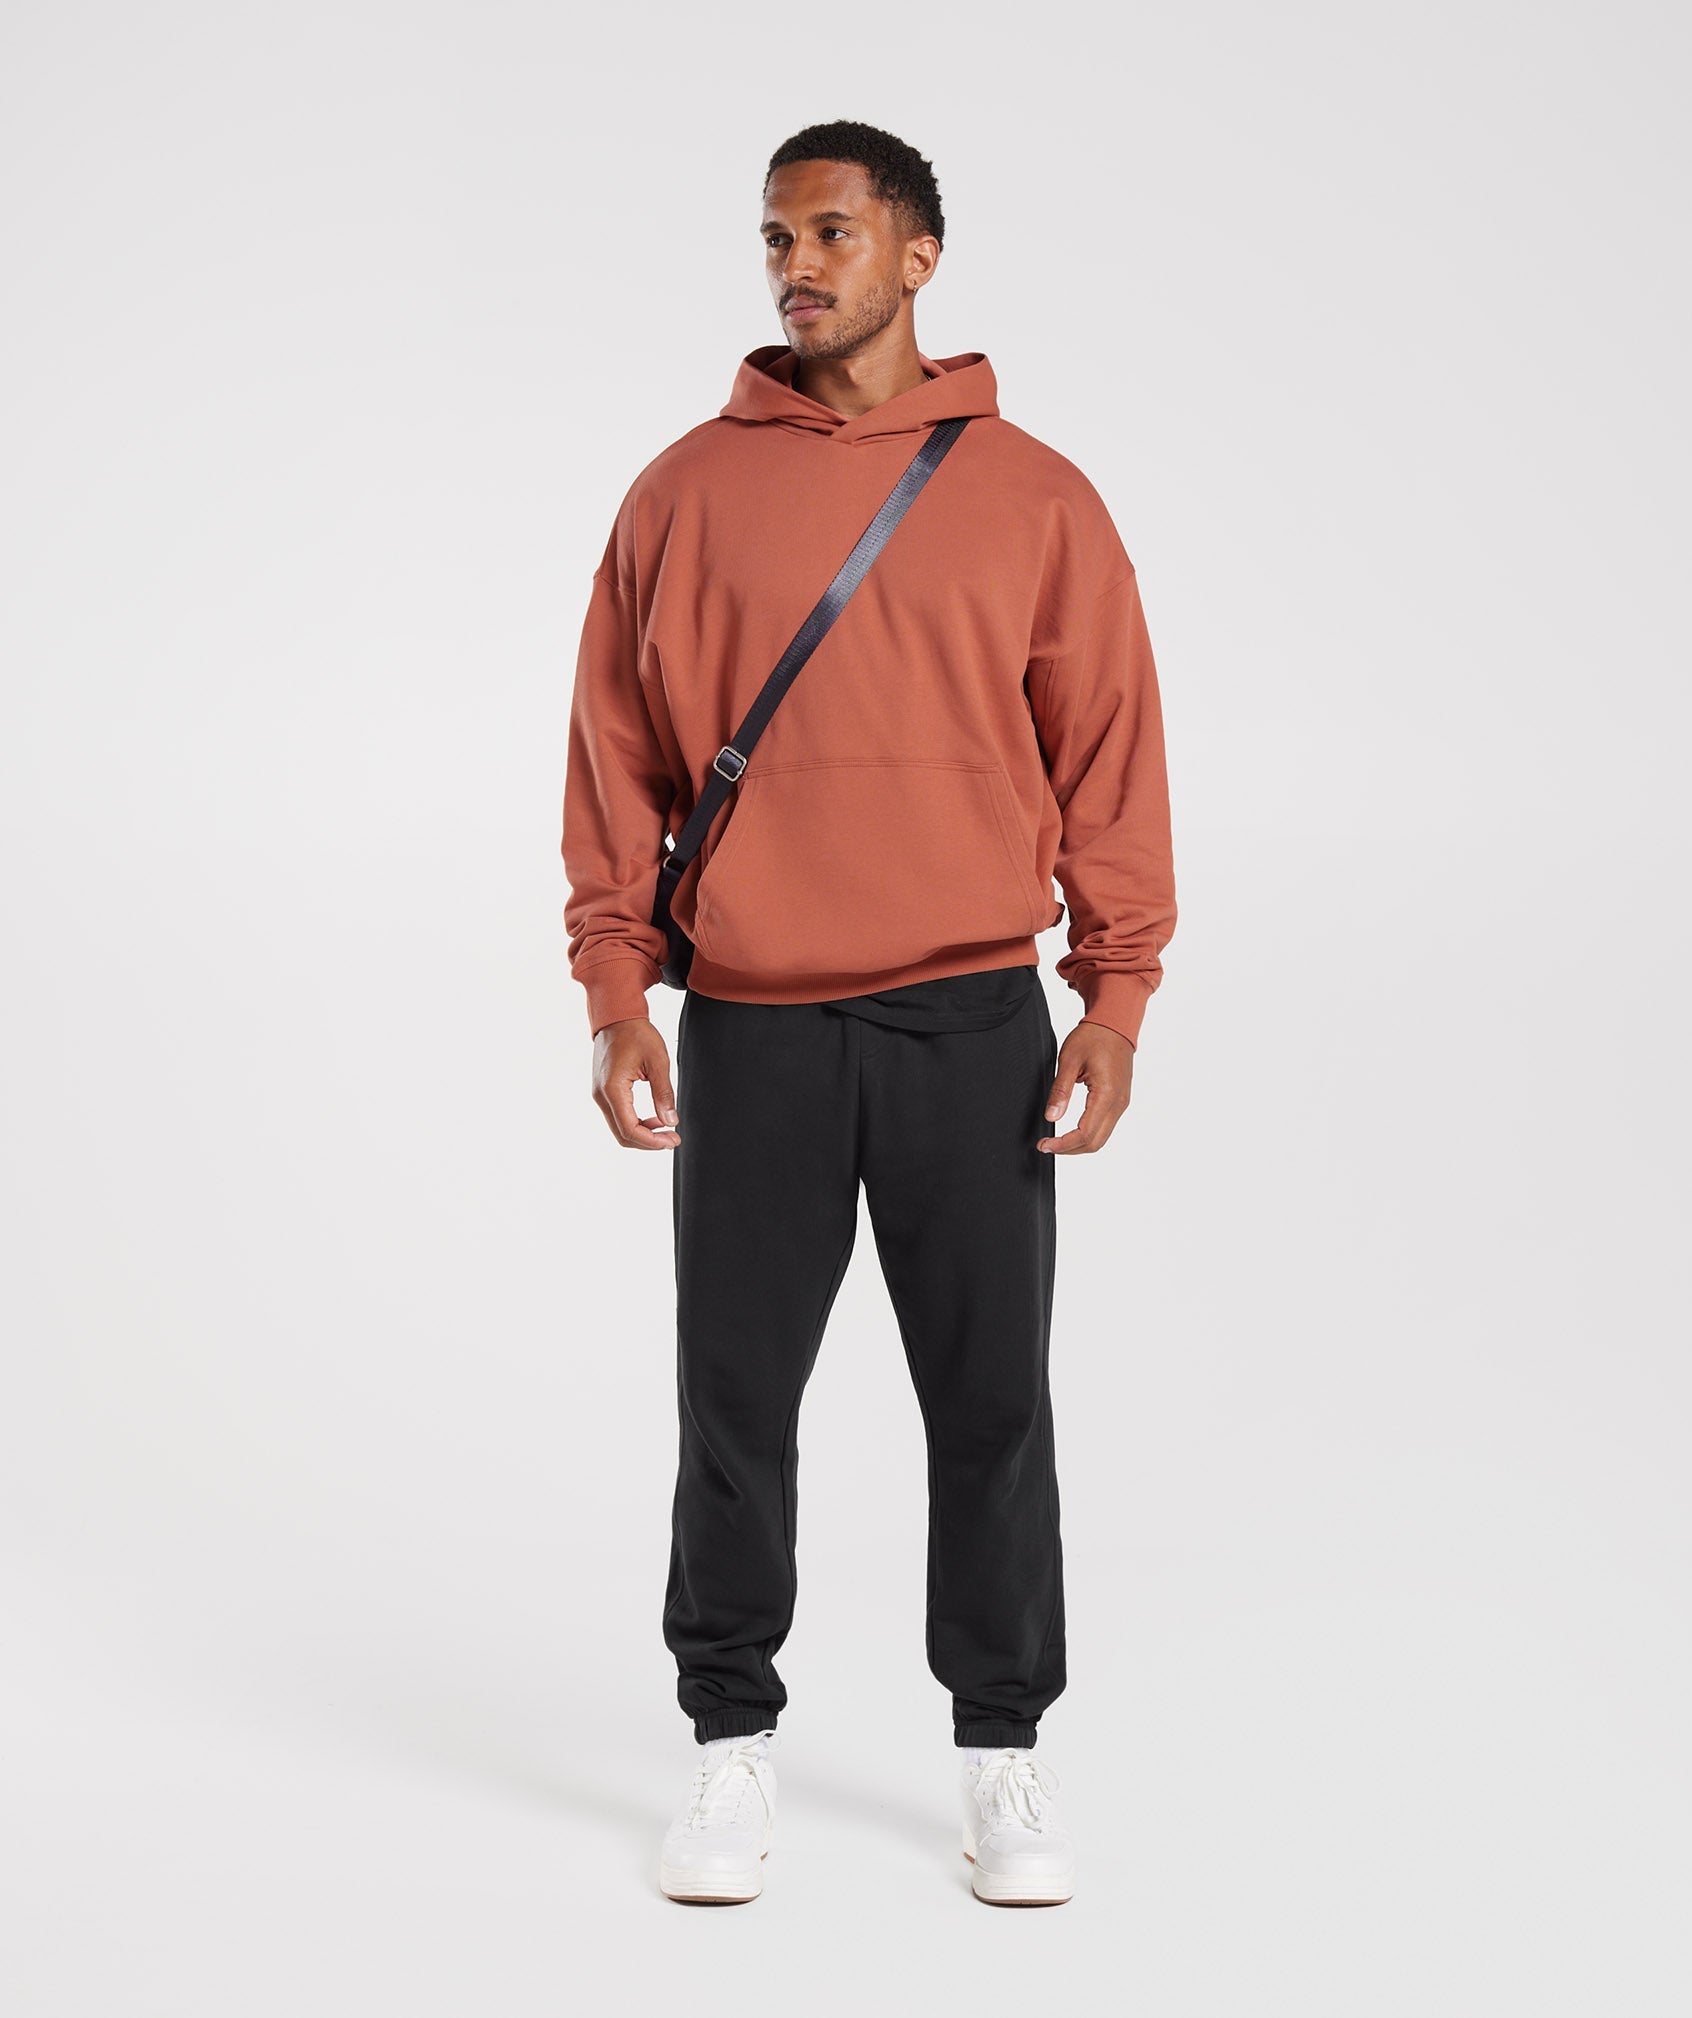 Rest Day Essentials Hoodie in Persimmon Red - view 4